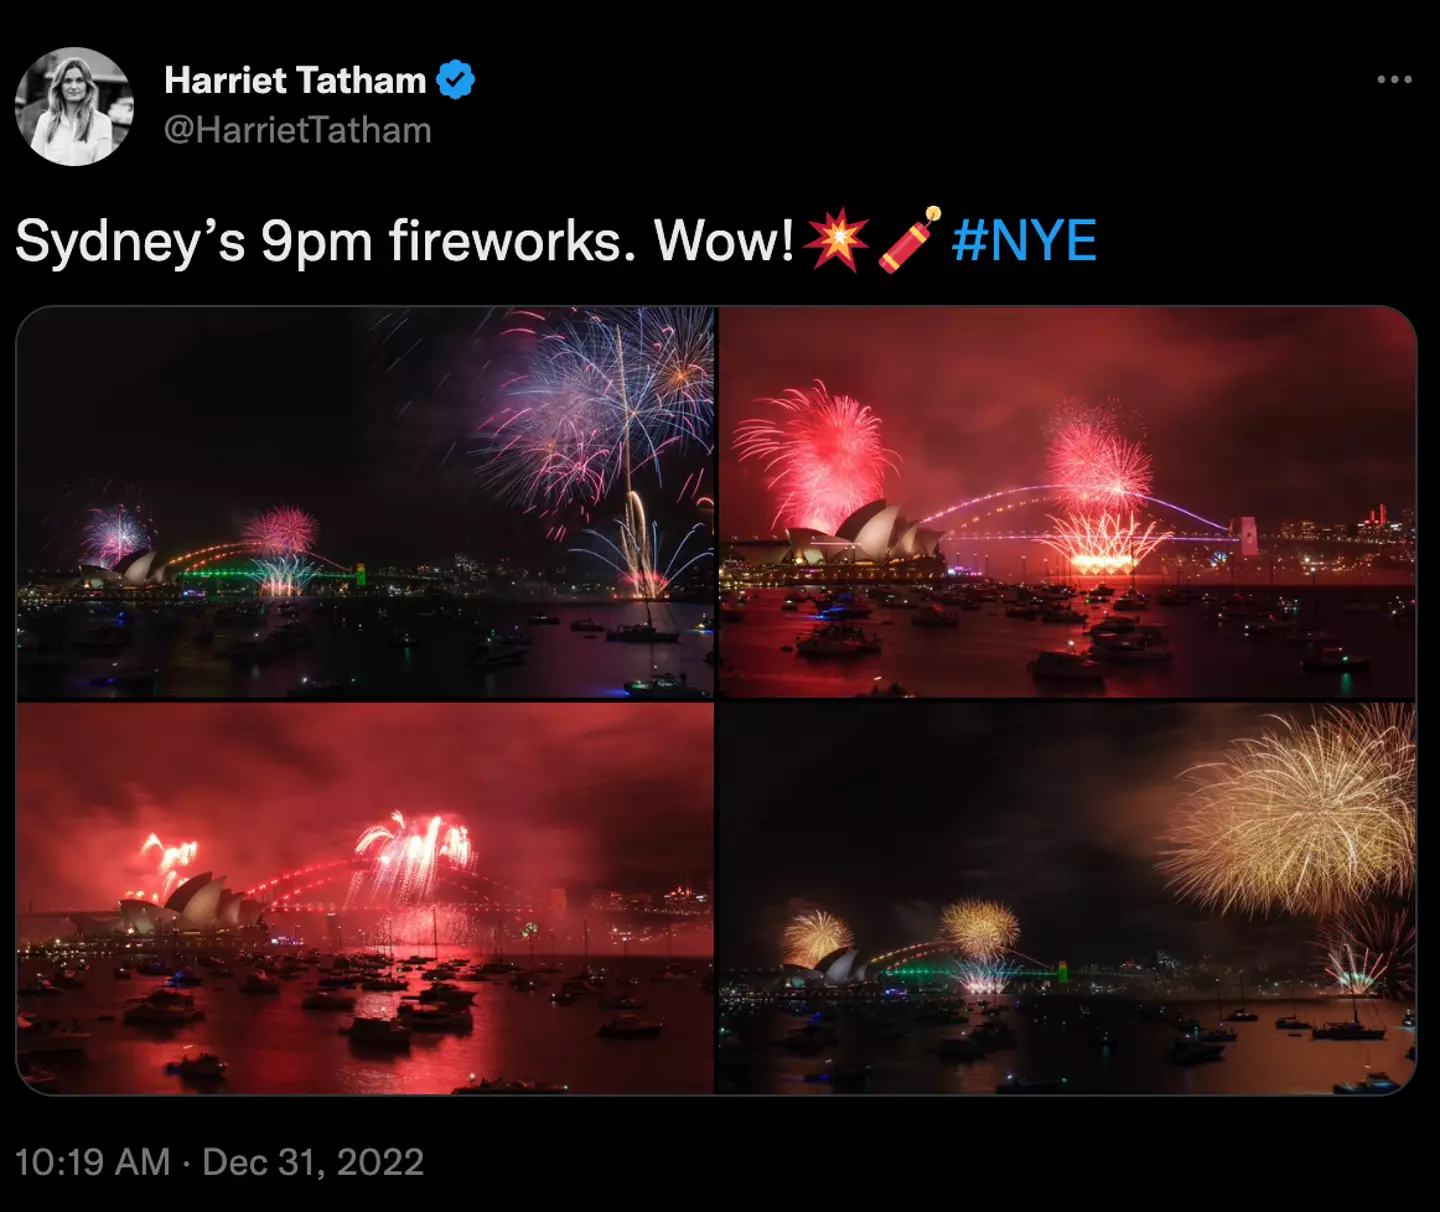 People flooded to social media to praise the 9:00pm fireworks show.